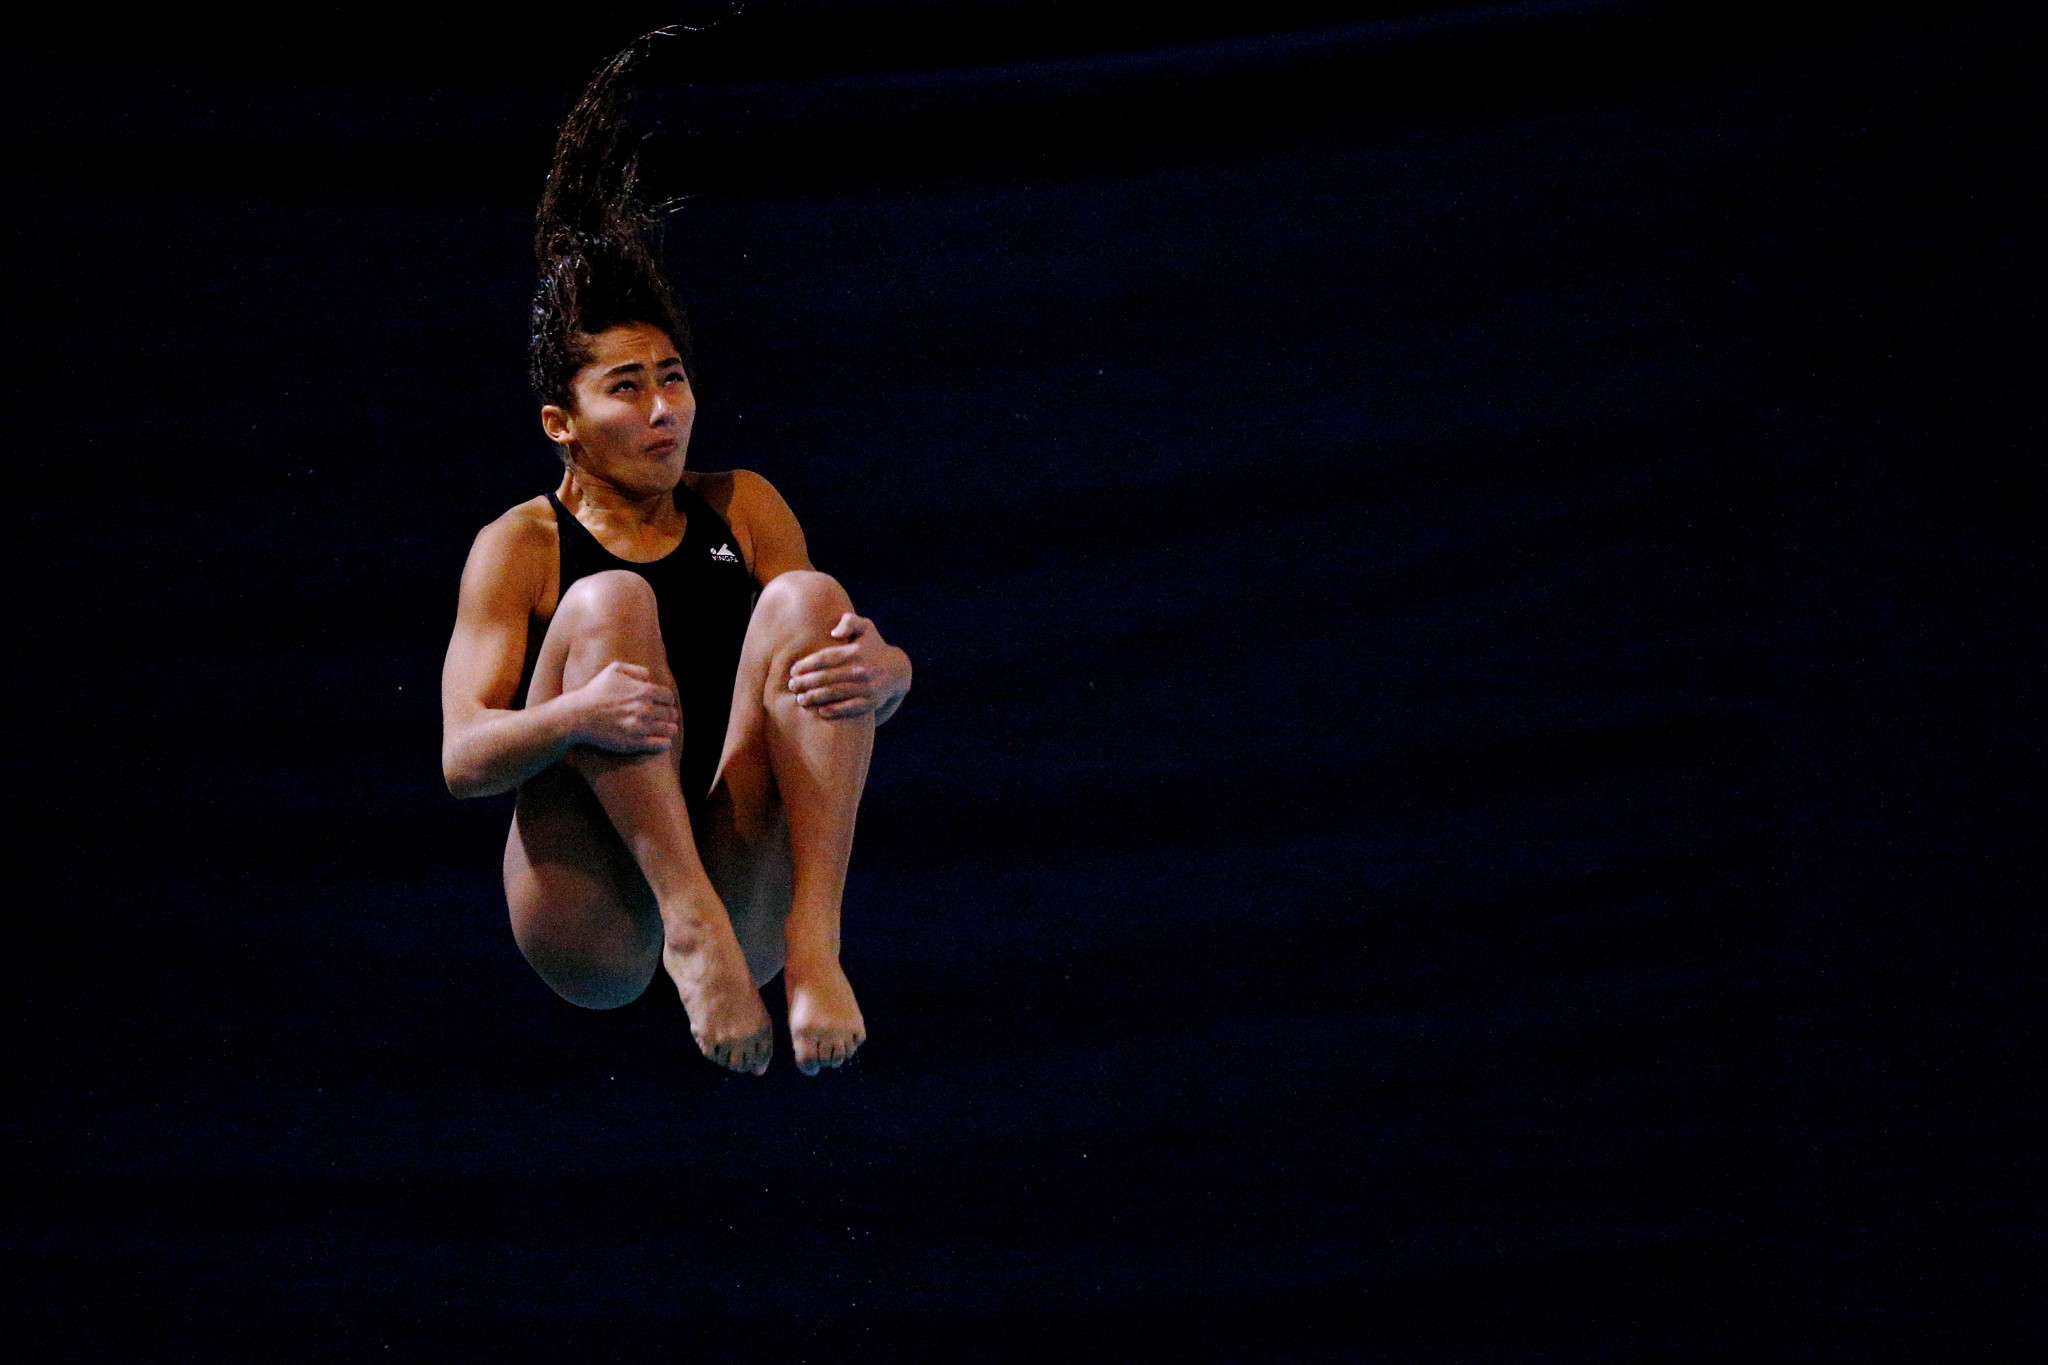 Maha Eissa beat fellow home athletes Maha Abdelsalam and Habiba Shoeib to the women's 3 metres springboard gold medal on day three of the FINA Diving Grand Prix in Egypt's capital Cairo ©Getty Images